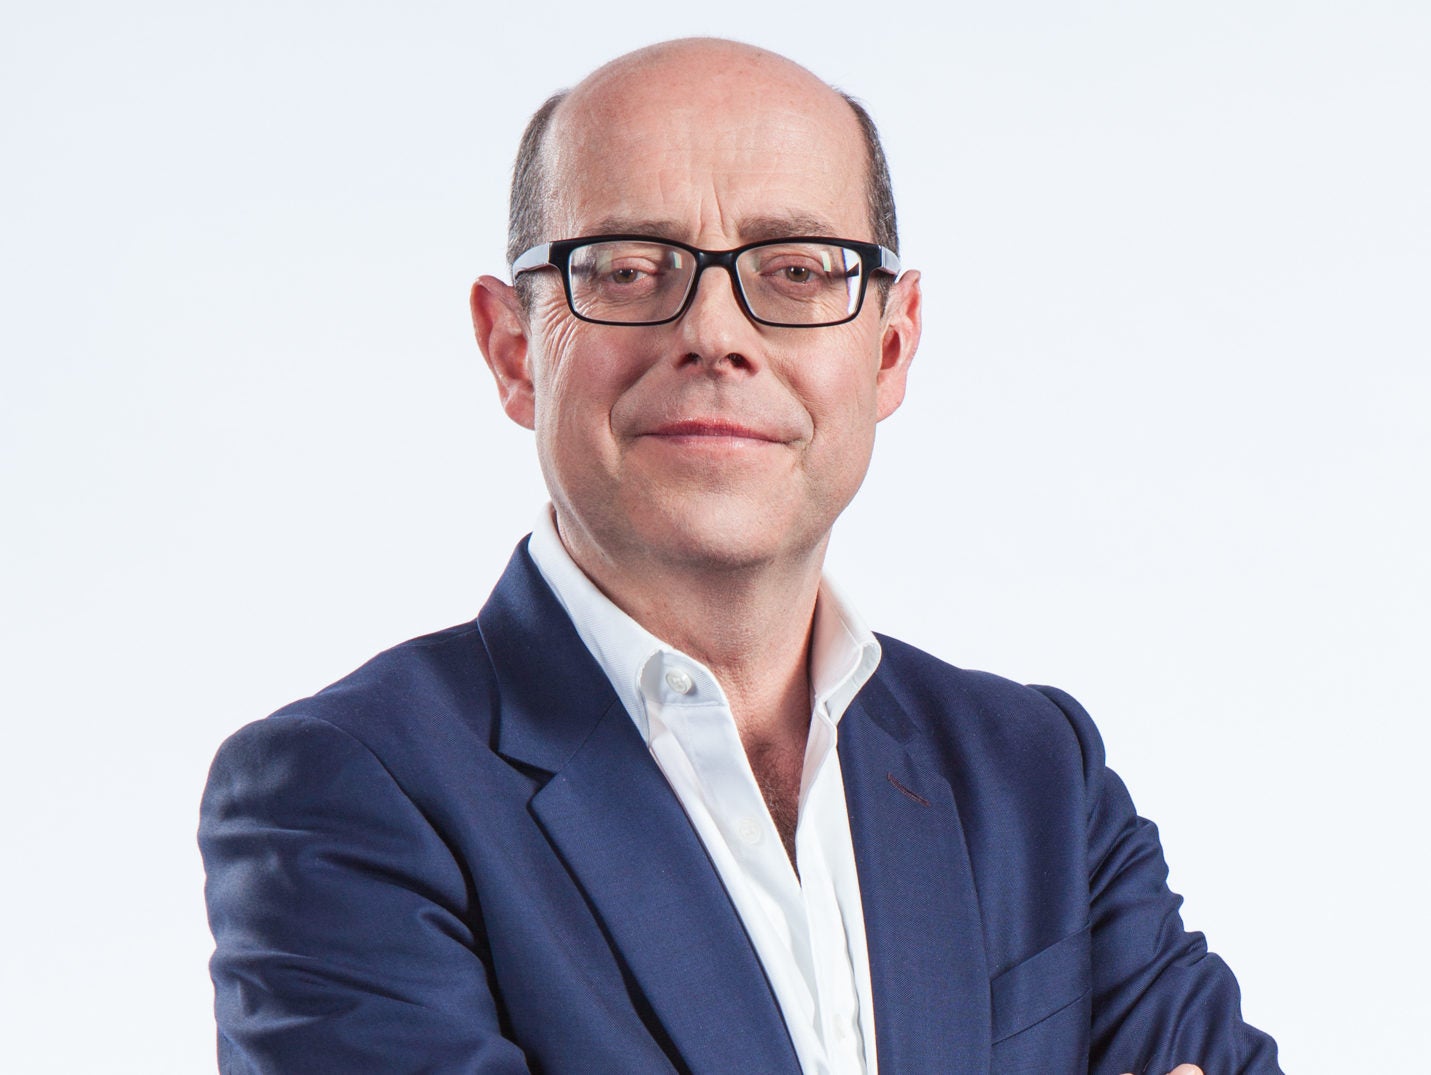 Ministerial boycott of Today was 'welcomed by many' listeners, says Nick Robinson